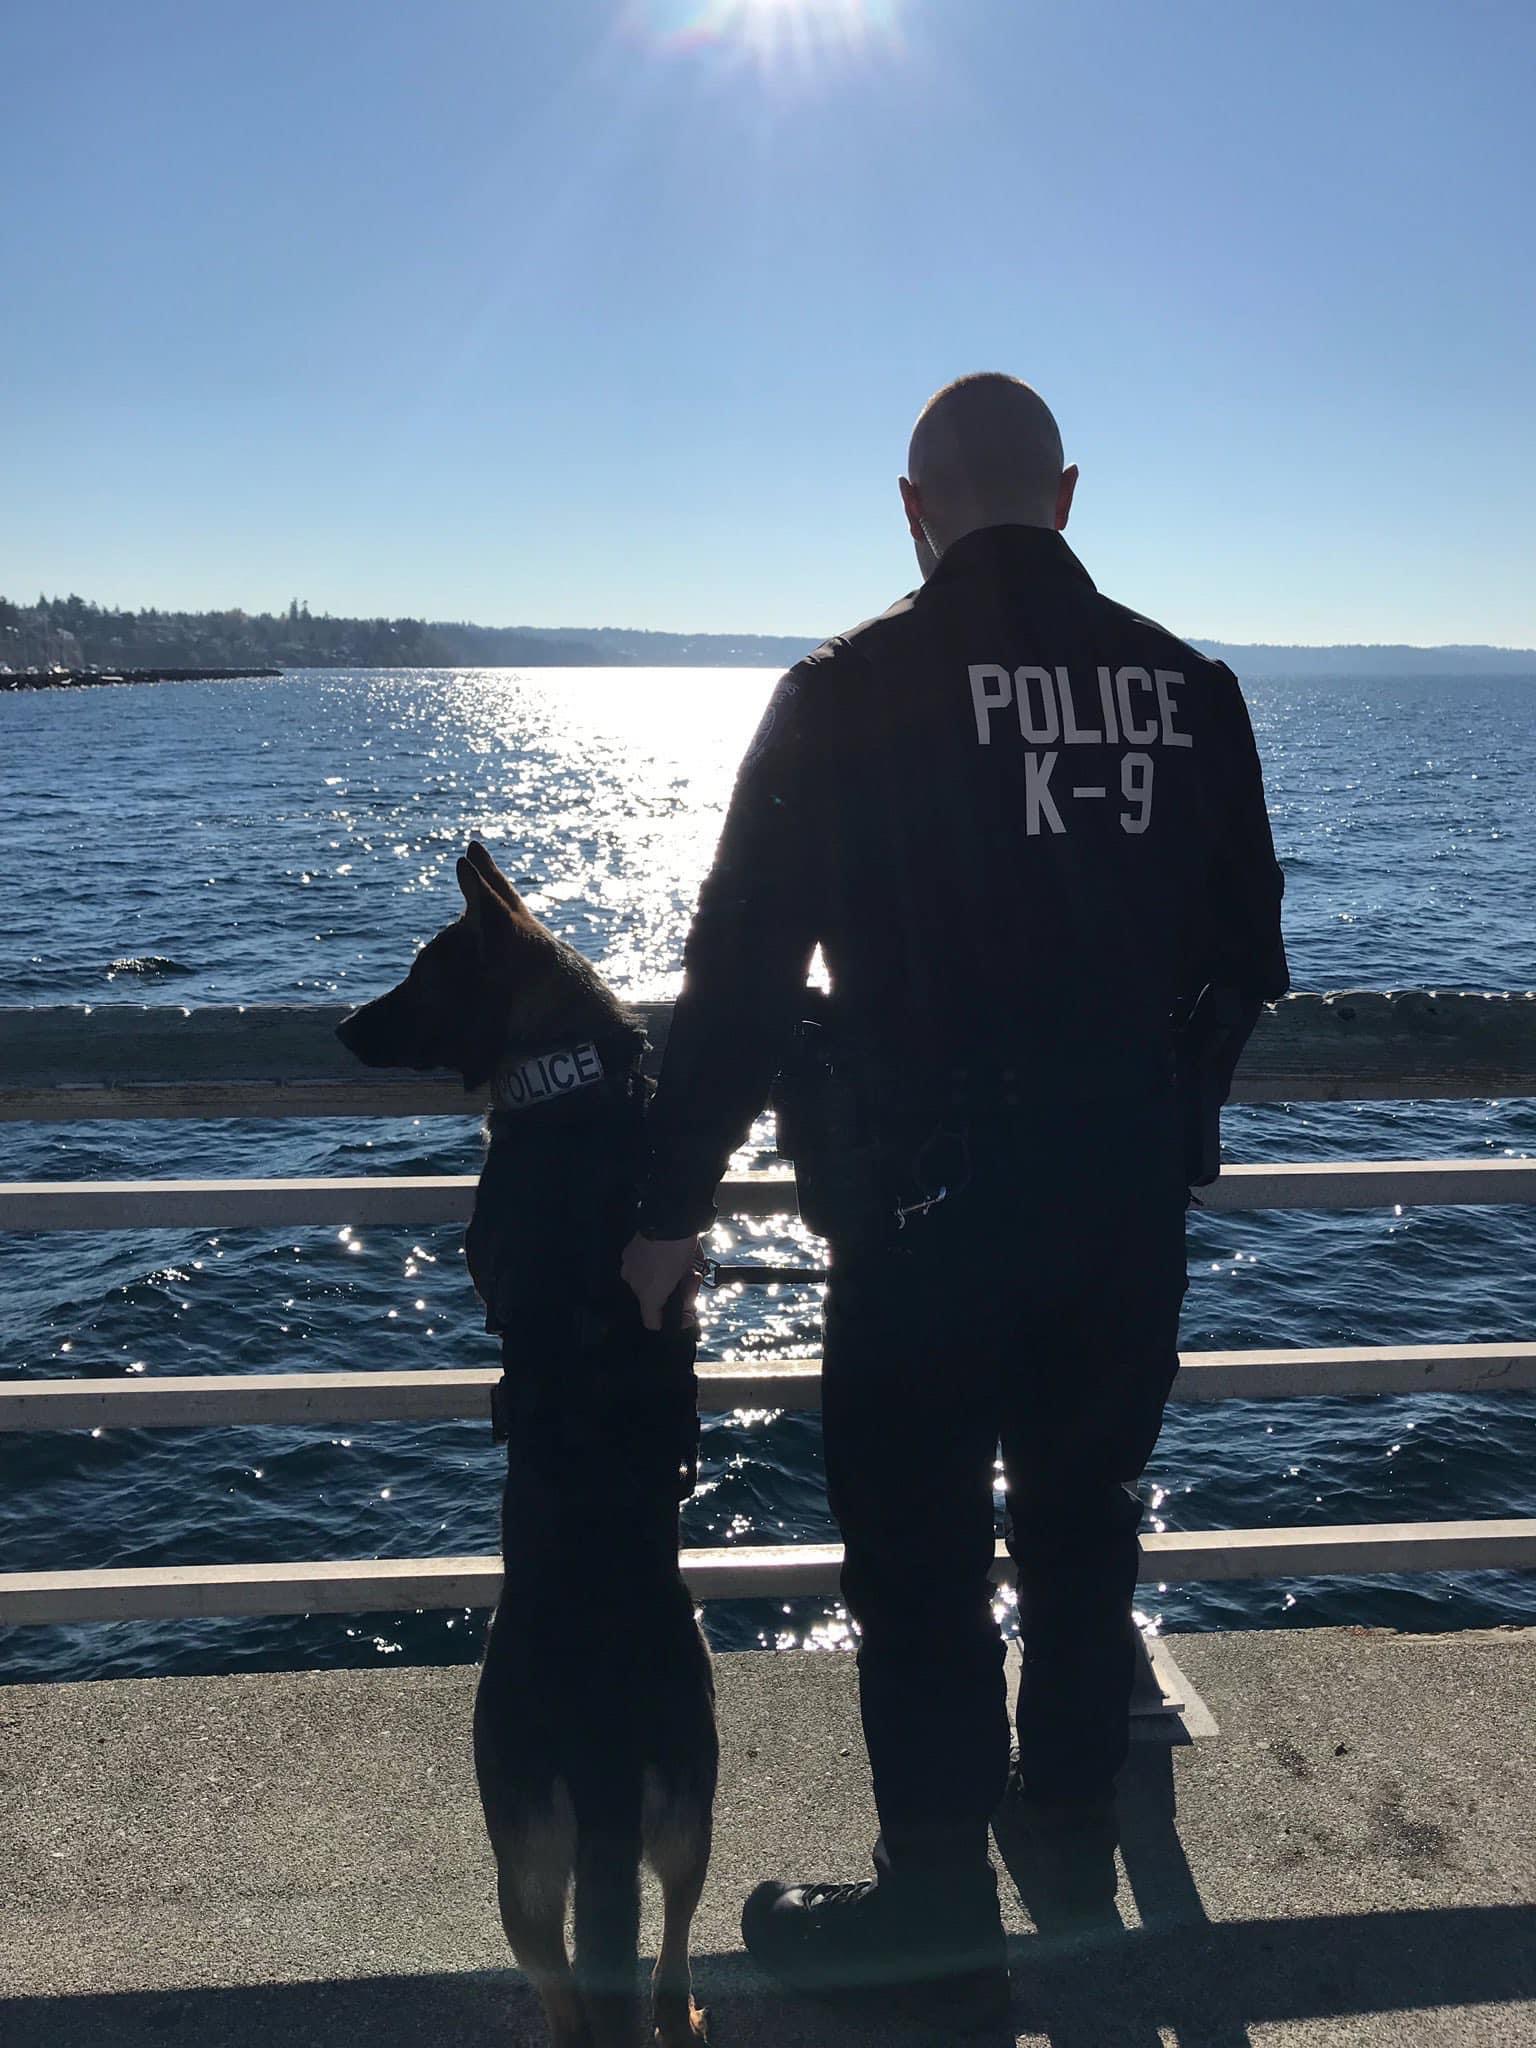 A K-9 officer and his dog stand against the railing of a pier, looking out over the water.